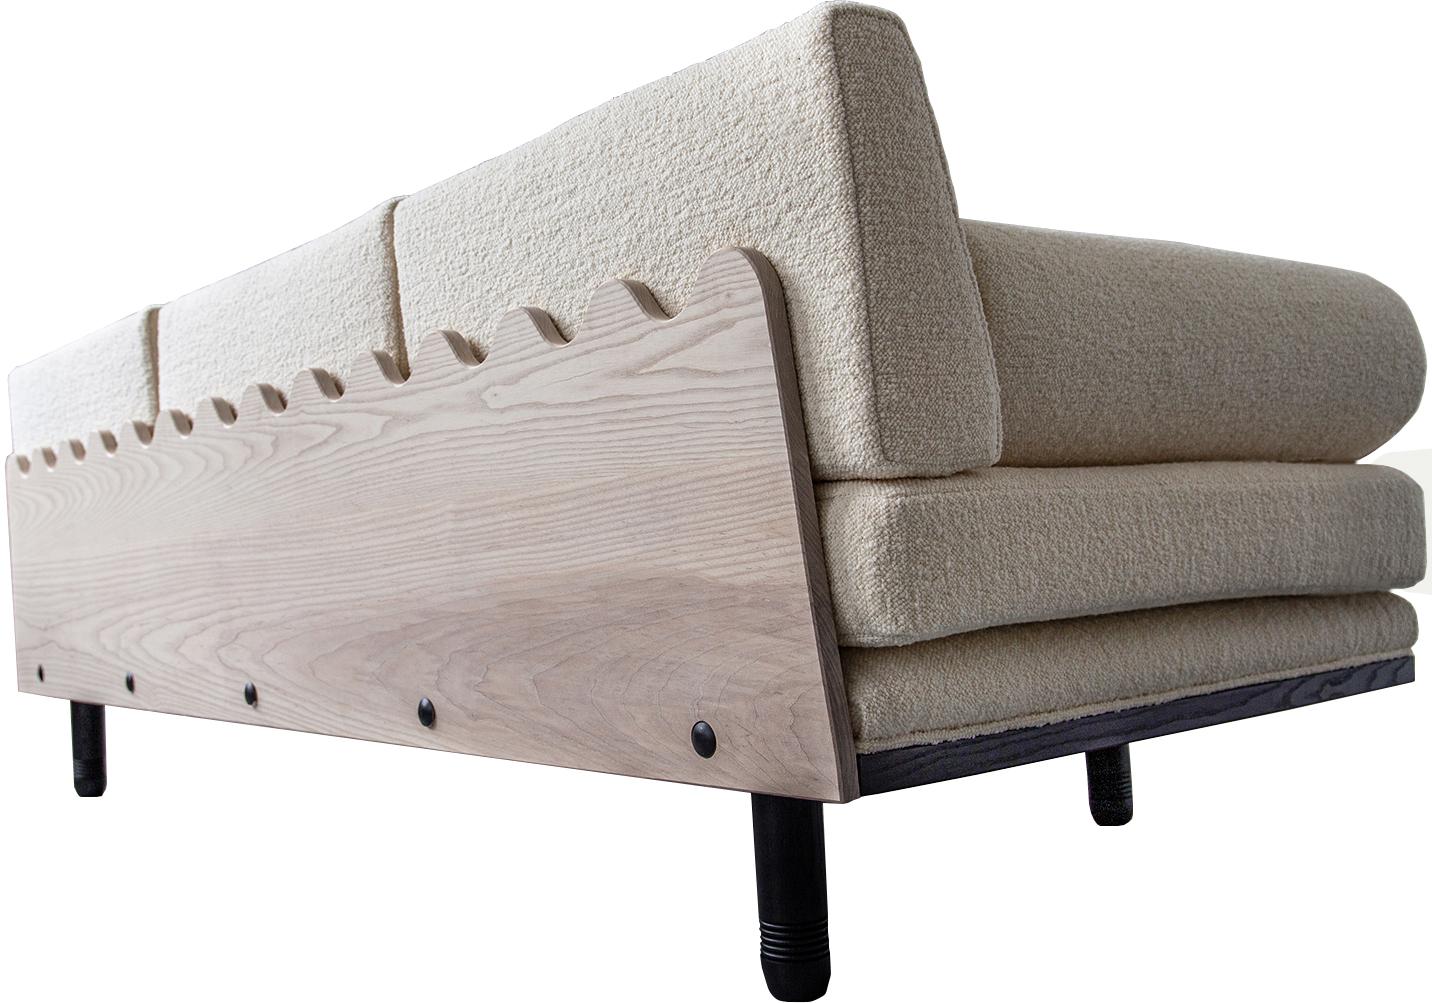 A decadent three-seat sofa daybed of sculptural trapezoidal form inspired by the fallen architectural ruins of the ancient city of Baalbek, a levantine outpost on the Roman frontier. Featuring plinth bolsters, removable arched back support and deep